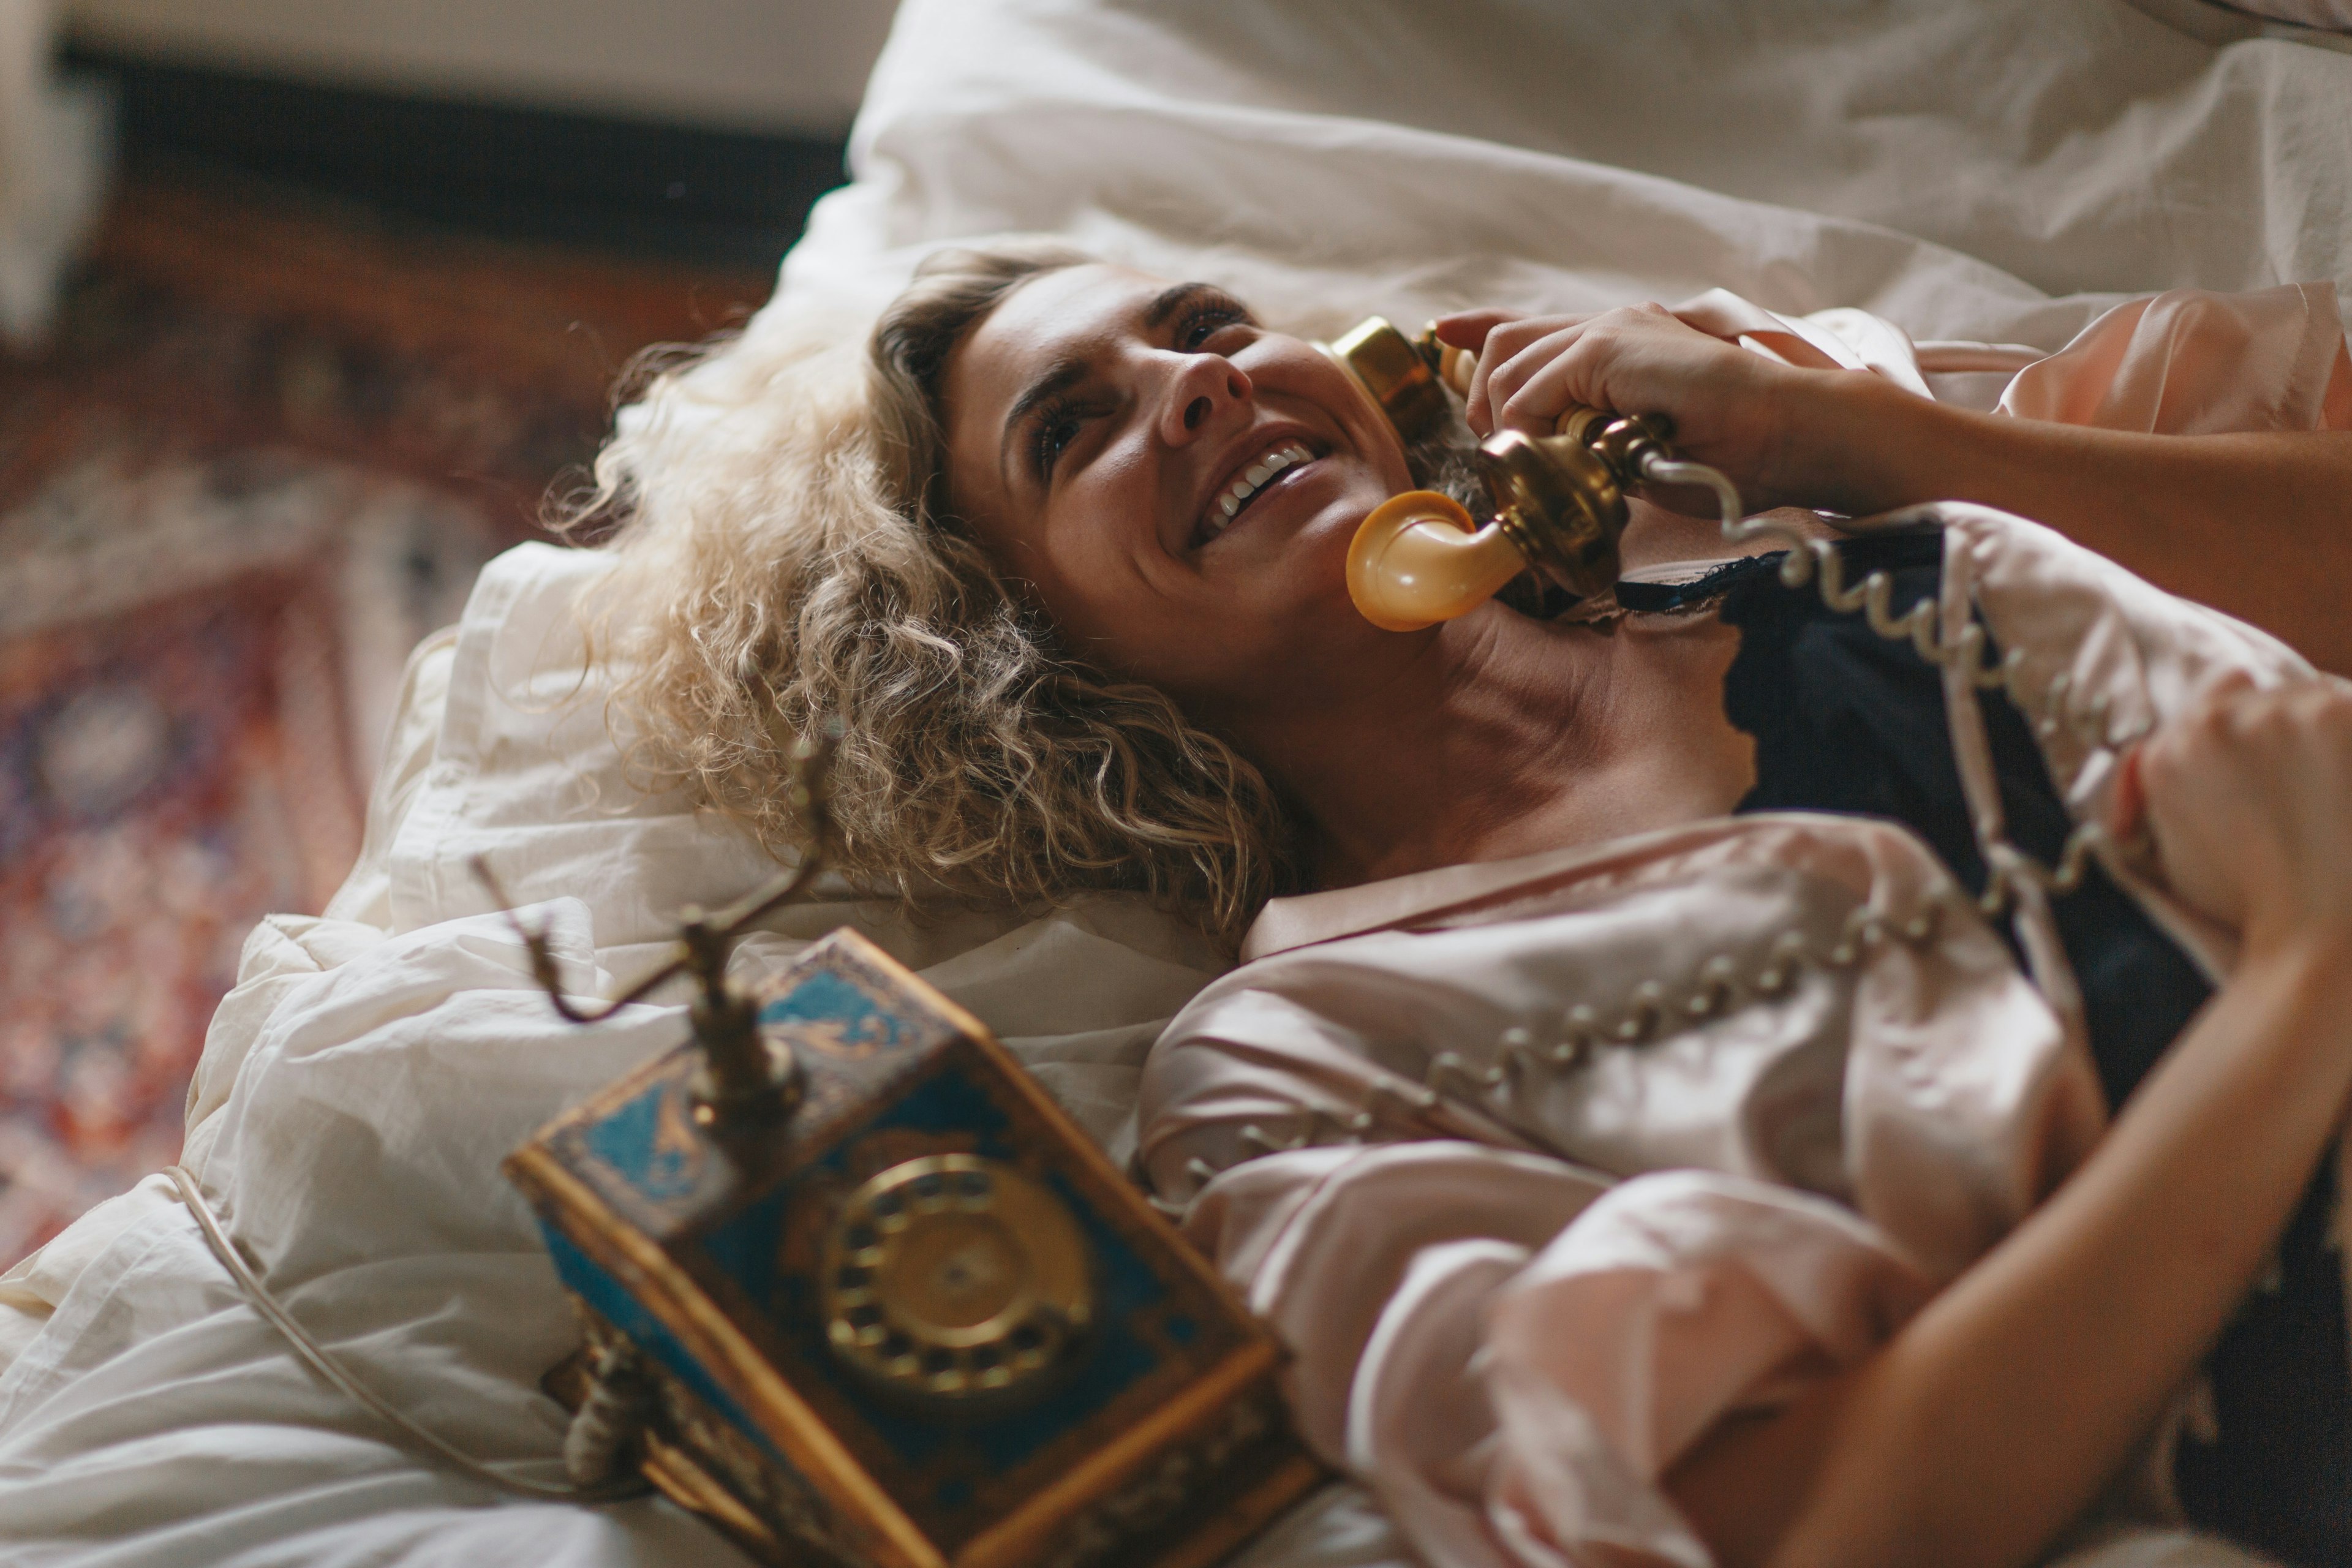 A woman laying on a bed talking on an old-timey rotary phone.